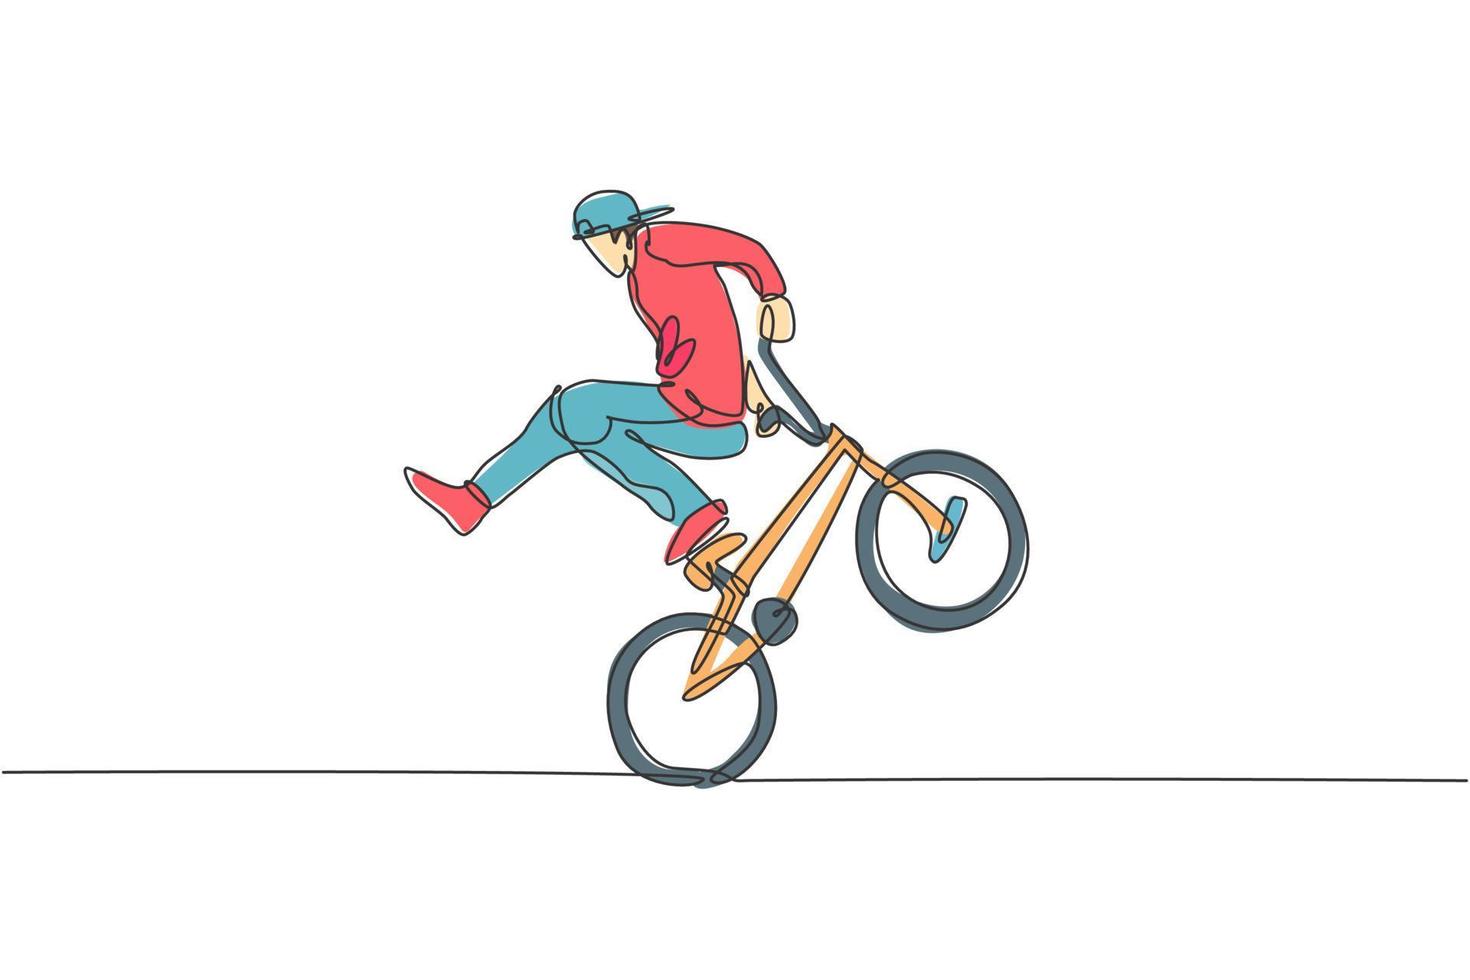 Single continuous line drawing of young BMX cycle rider show extreme risky trick in skatepark. BMX freestyle concept. Trendy one line draw design vector illustration for freestyle promotion media